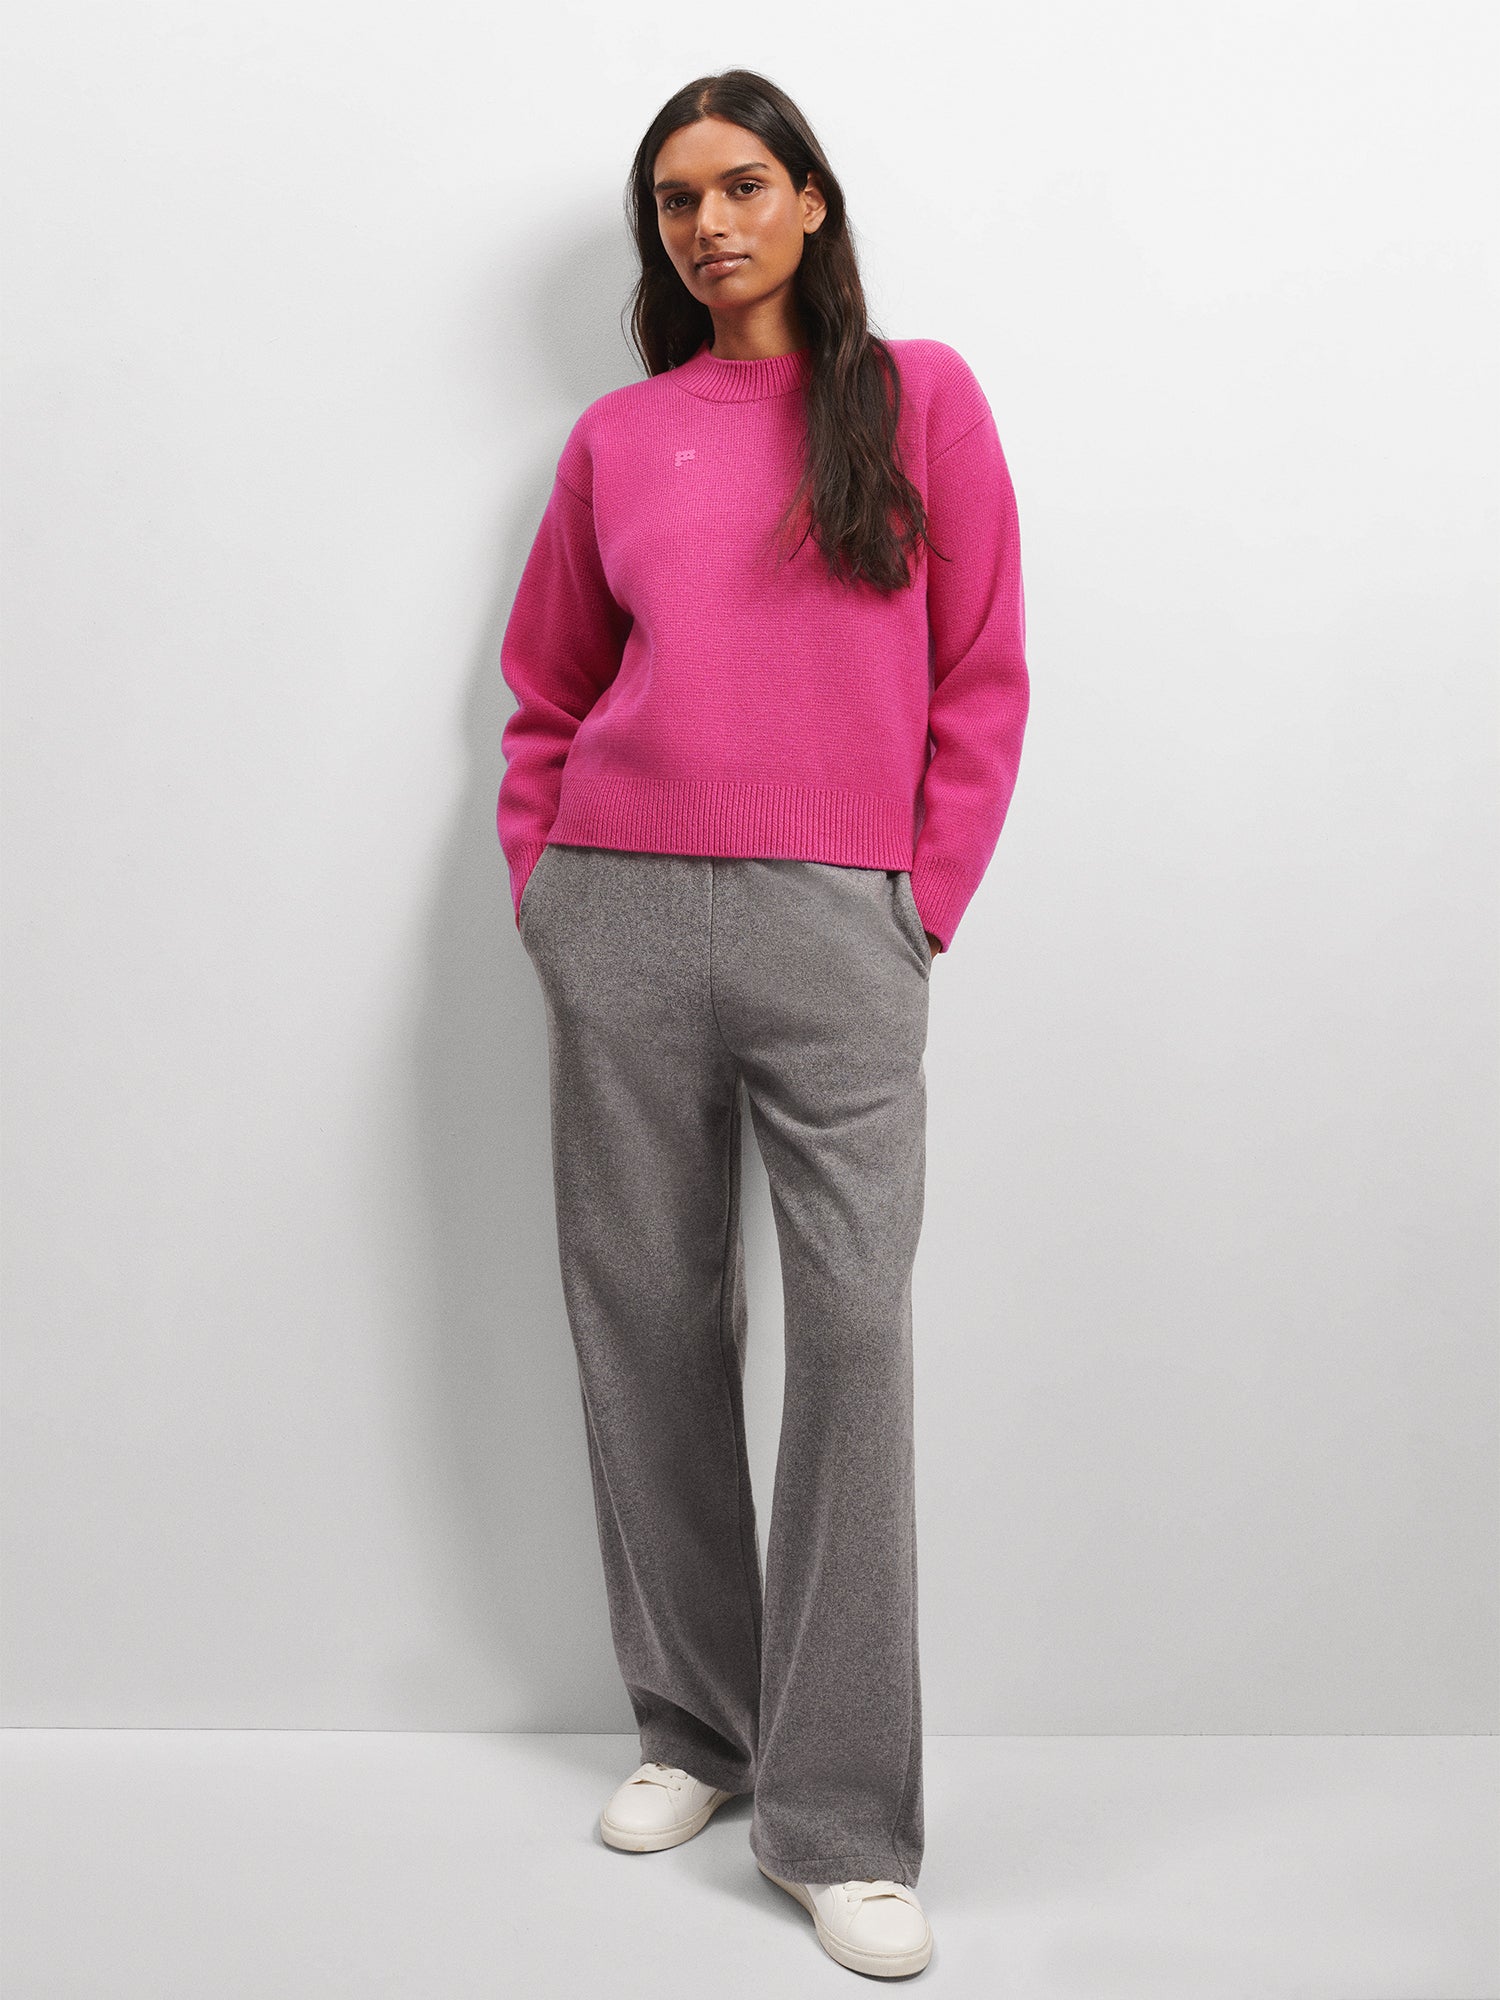 Womens_Recycled_Cashmere_Knit_Crew_Neck_Sweater_Tourmaline_Pink-female-3